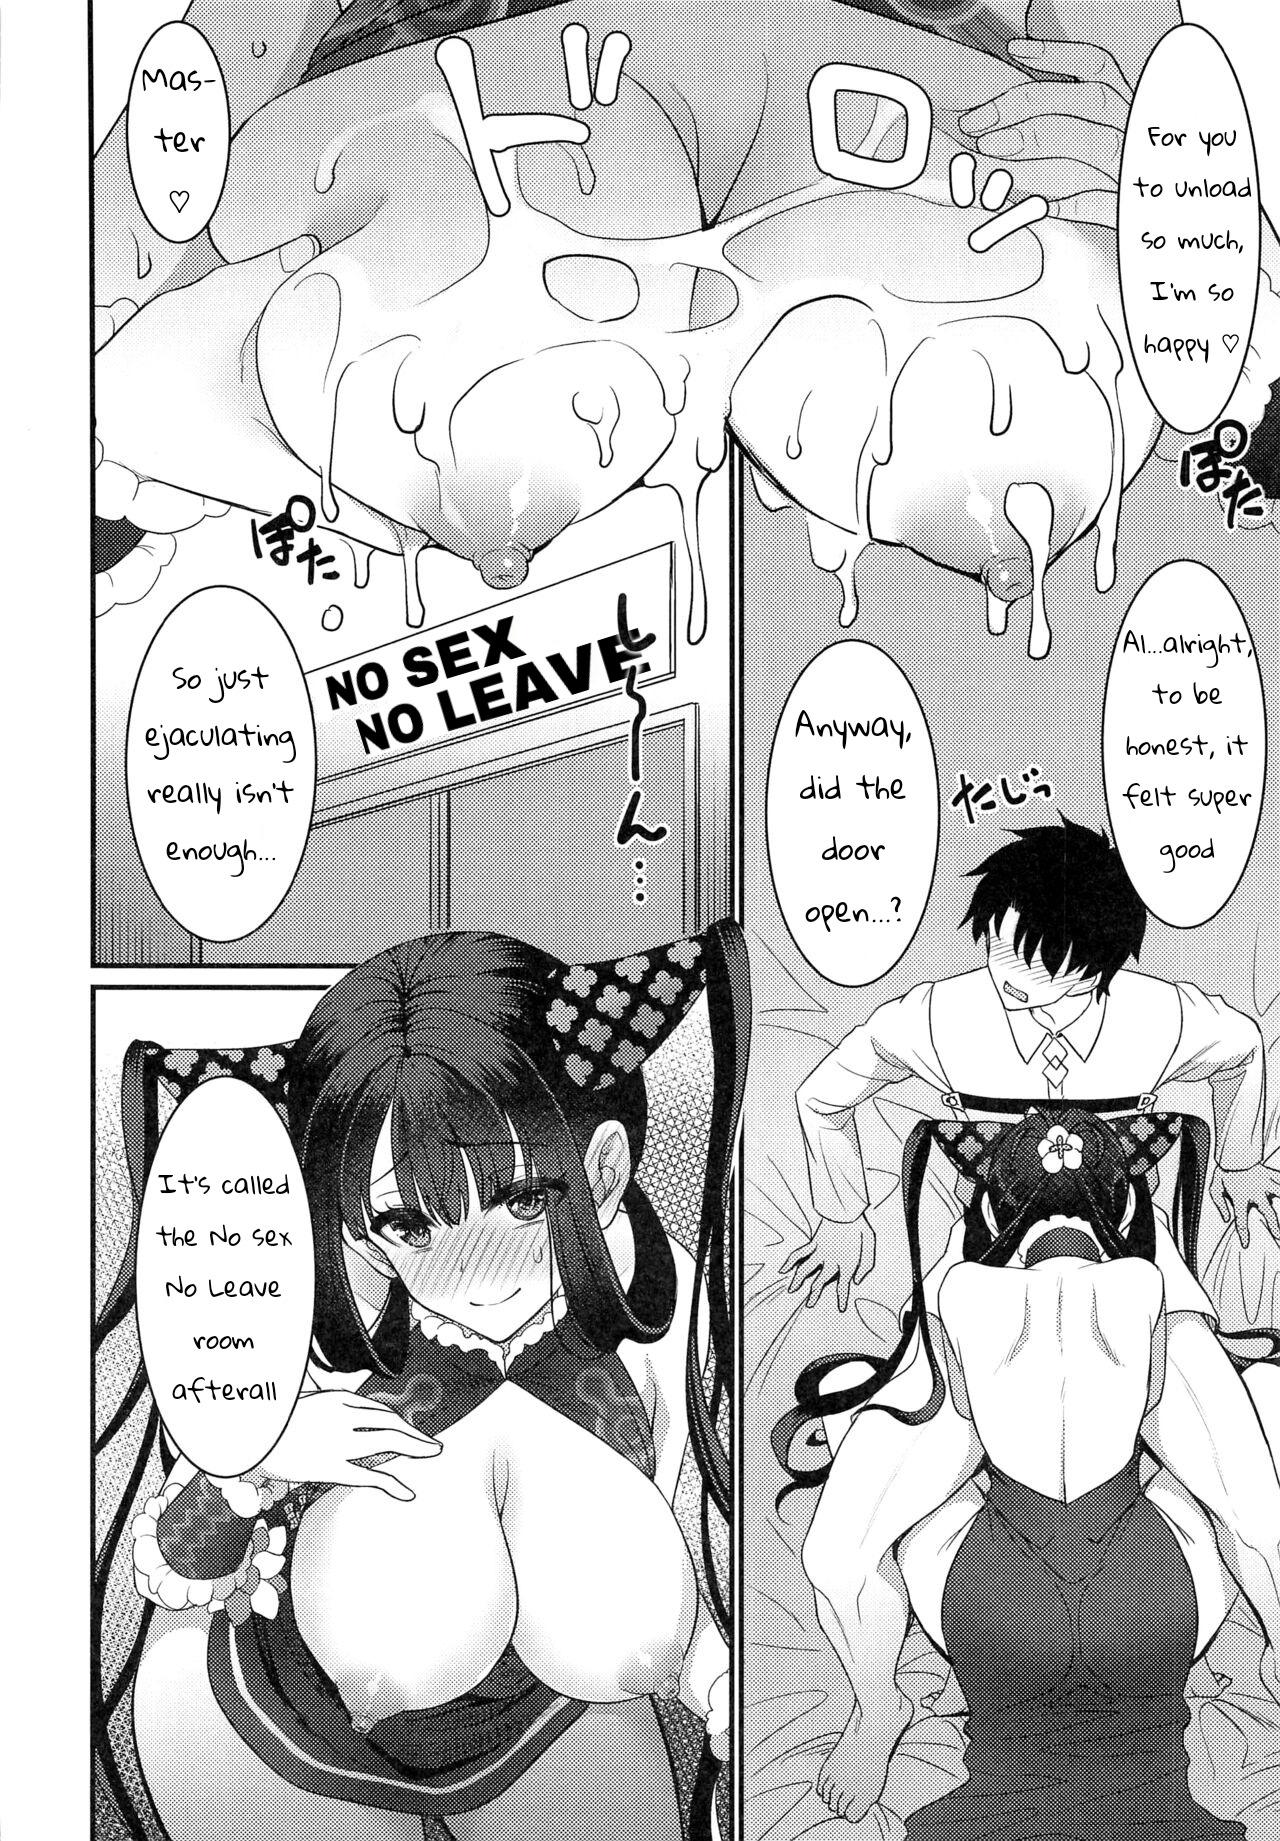 Sentones Rei no Heya de SEX Shita noni Derarenai Ken | We had SEX in the room but we still can't get out - Fate grand order Hairypussy - Page 7